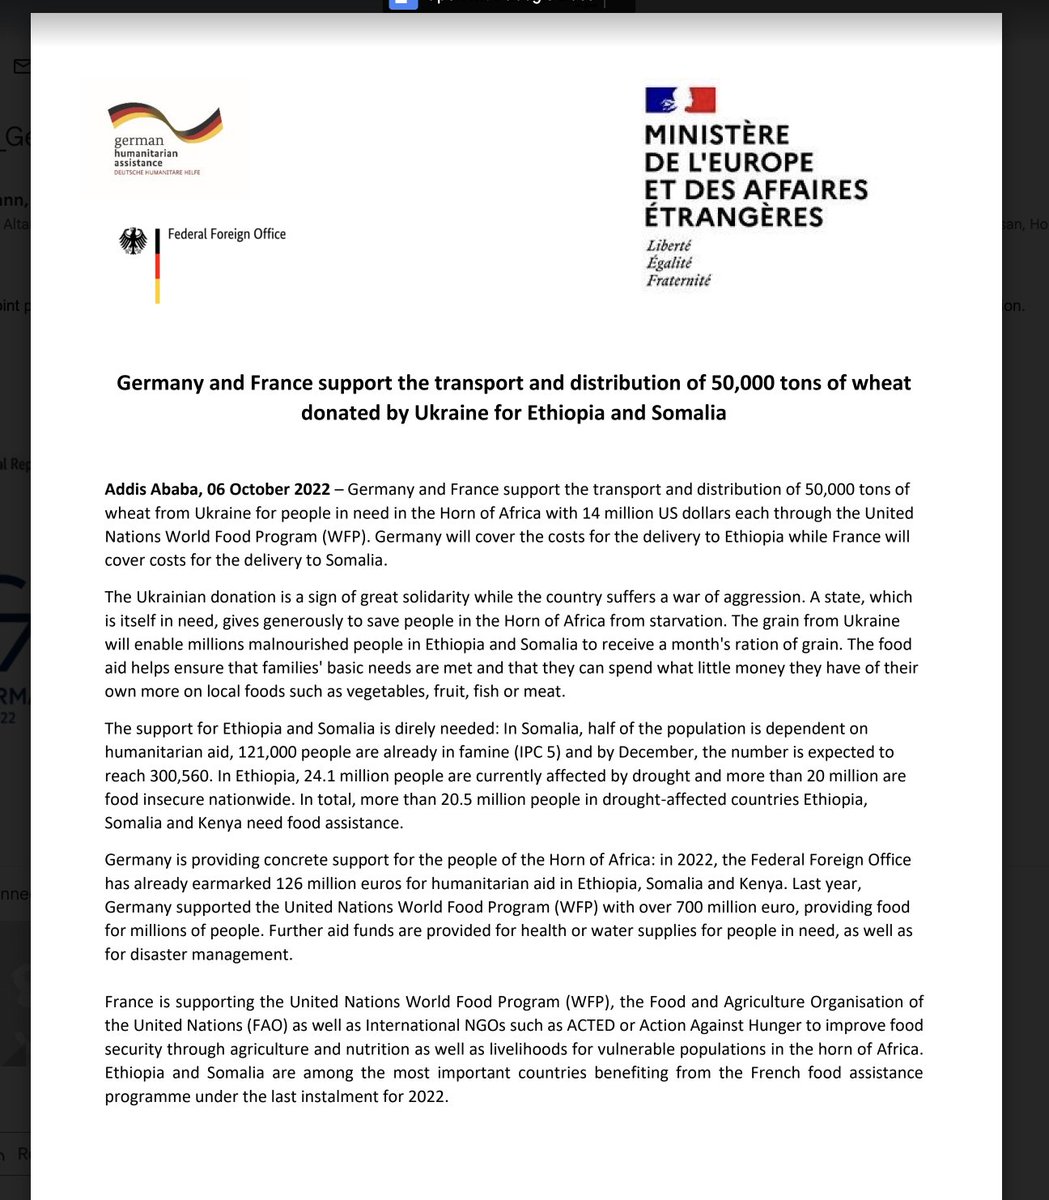 France and Germany collaborate to transport food donated by Ukraine to Somalia and Ethiopia